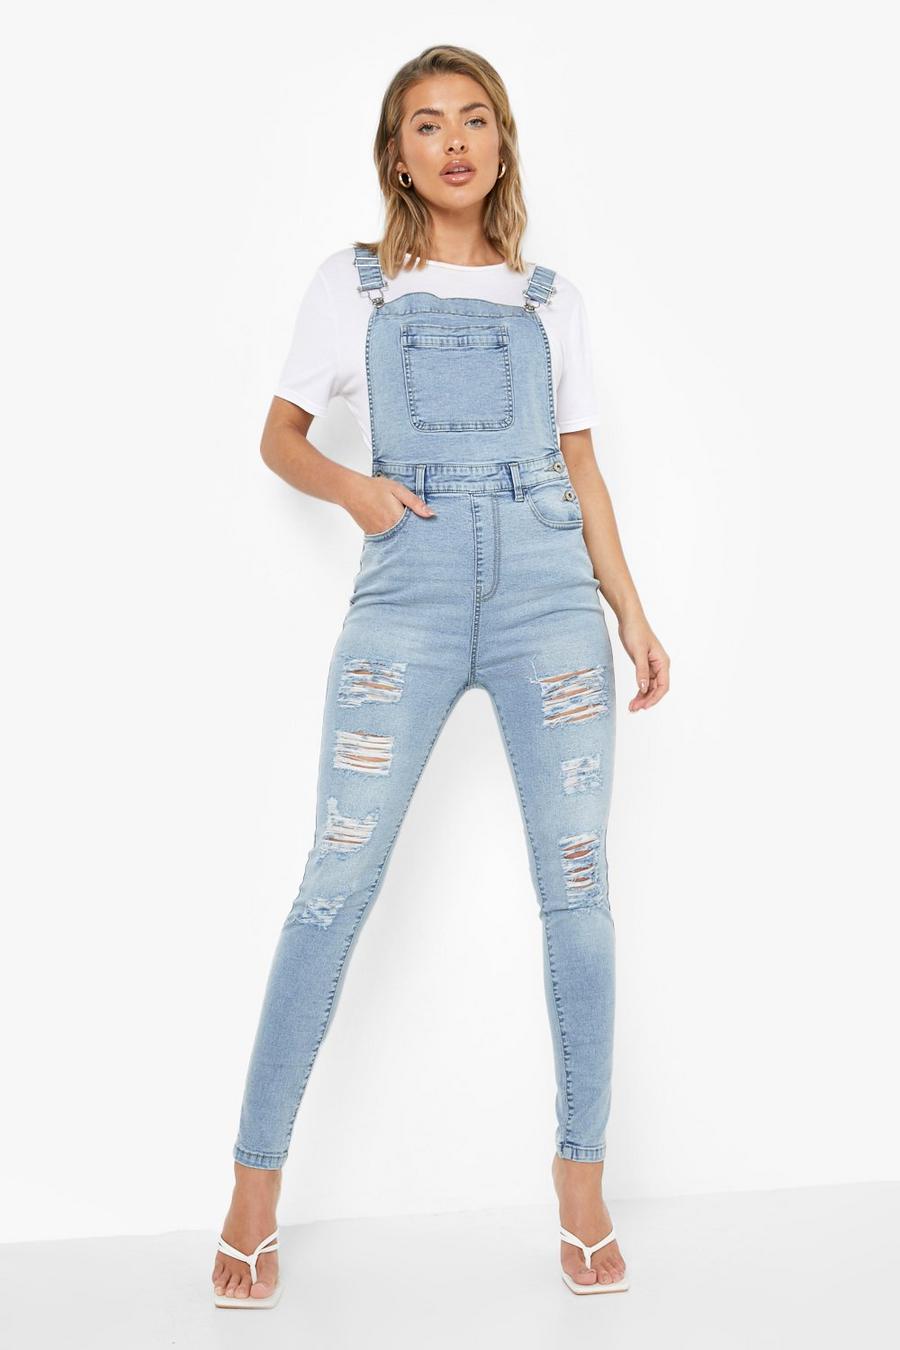 Boohoo Women Clothing Jeans 2 Womens Skinny Fit Extreme Ripped Denim Dungaree 